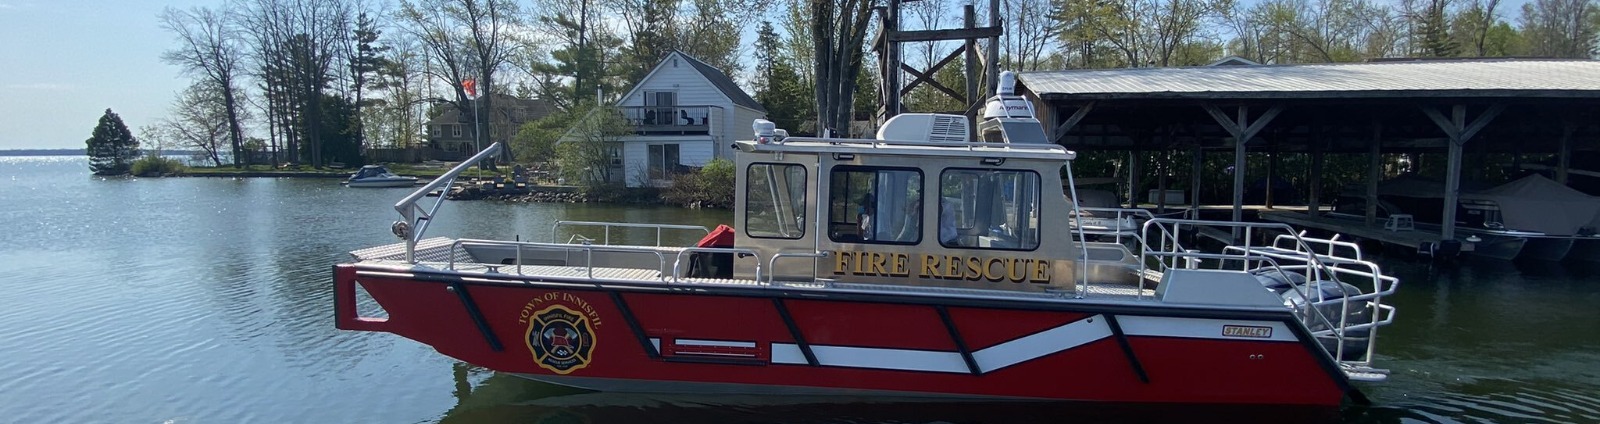 Services And Programs Town Of Innisfil, Boat Fire Pittsburgh